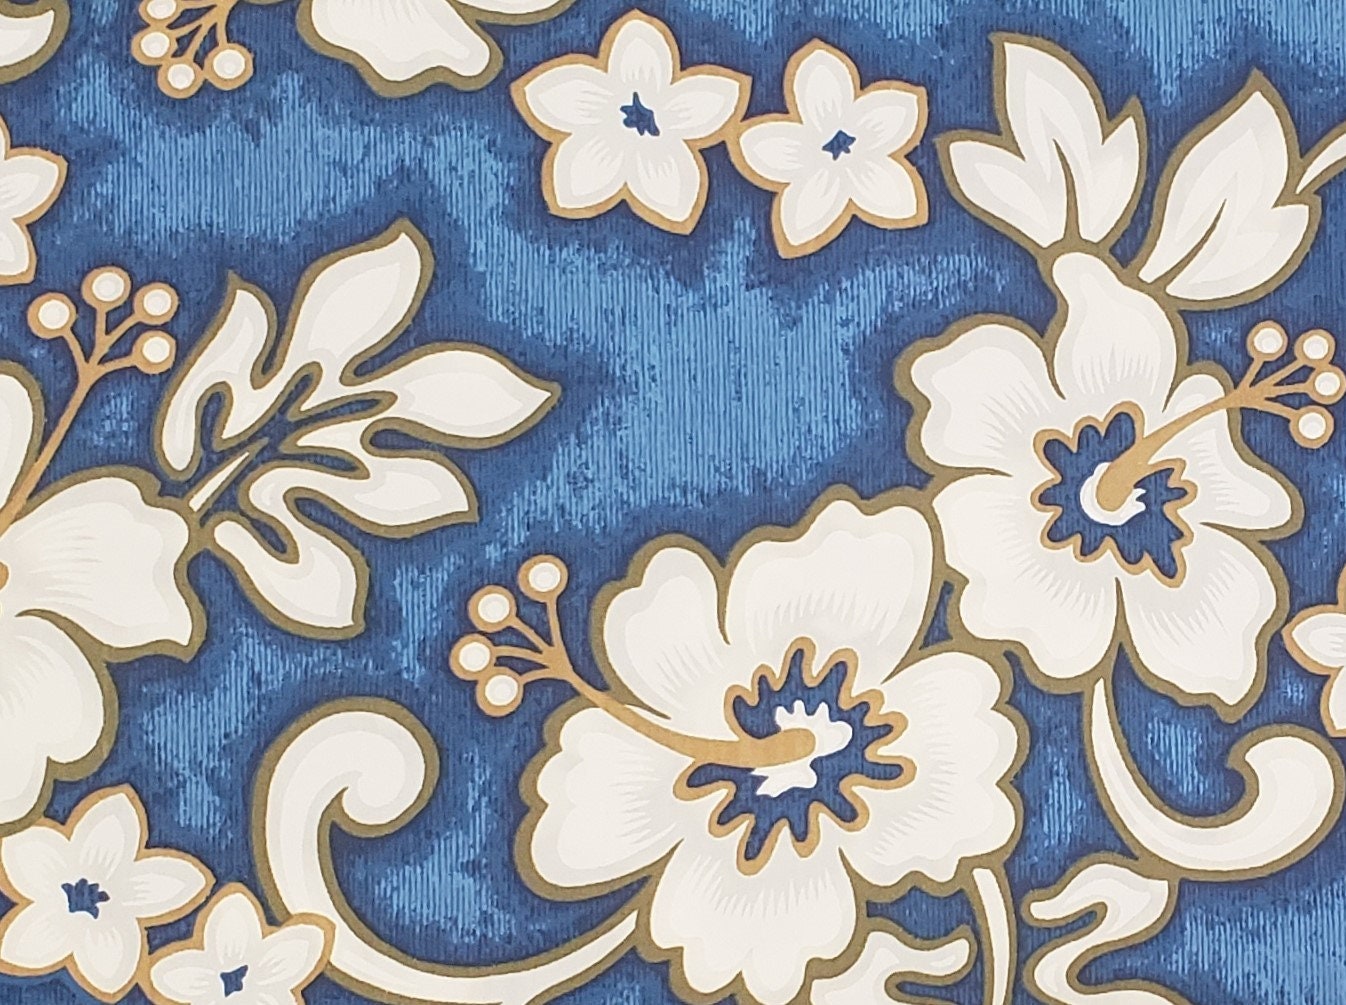 Hawaiian Print - Blue Fabric / White Flowers and Leaves / Gold Accents